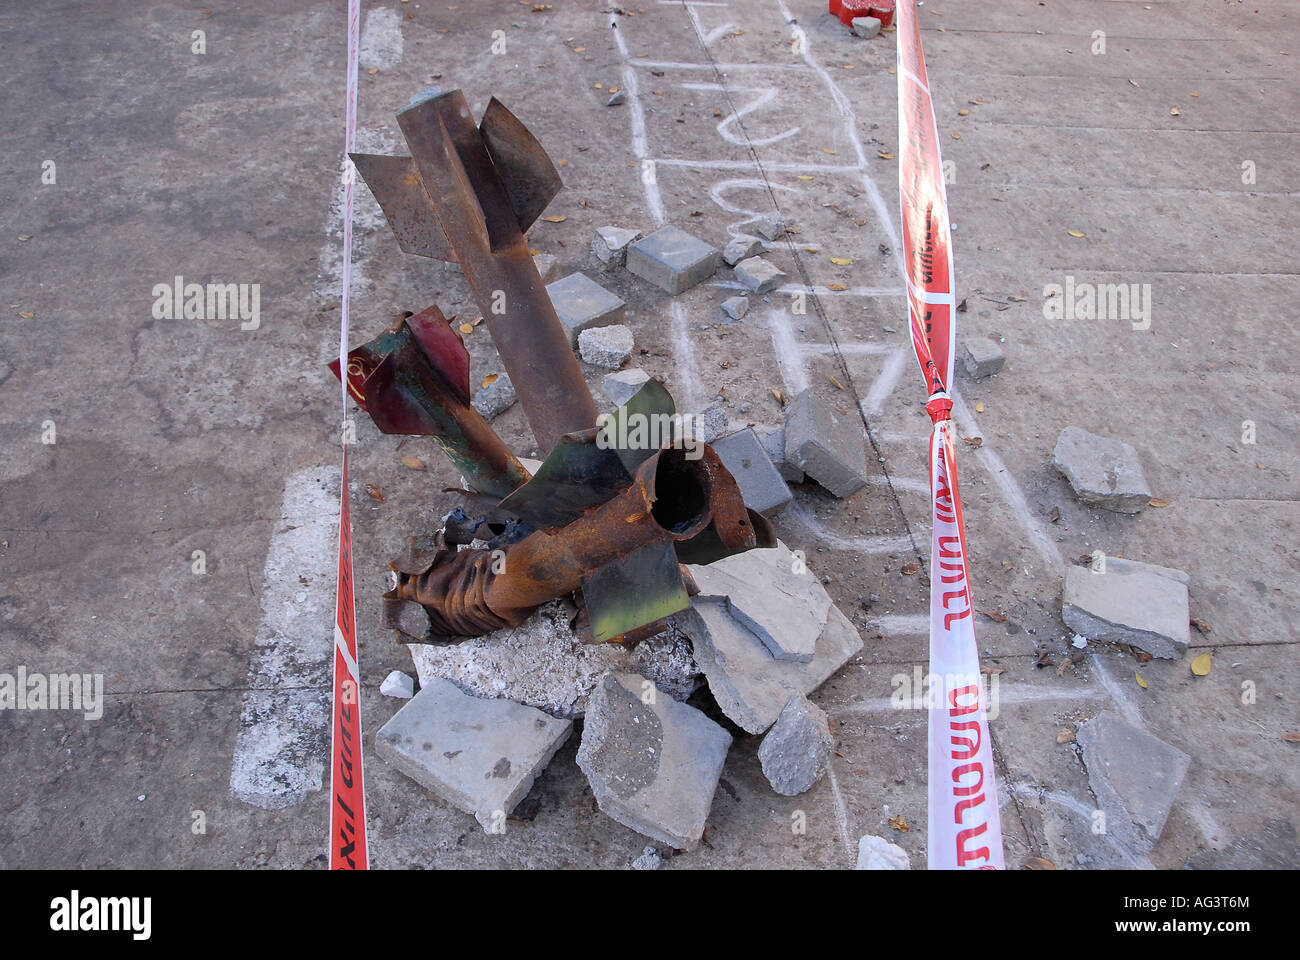 The tail fins of exploded Qassam rockets that were fired from Gaza Strip to southern Israel displayed in Rothschild avenue in Tel Aviv Israel Stock Photo